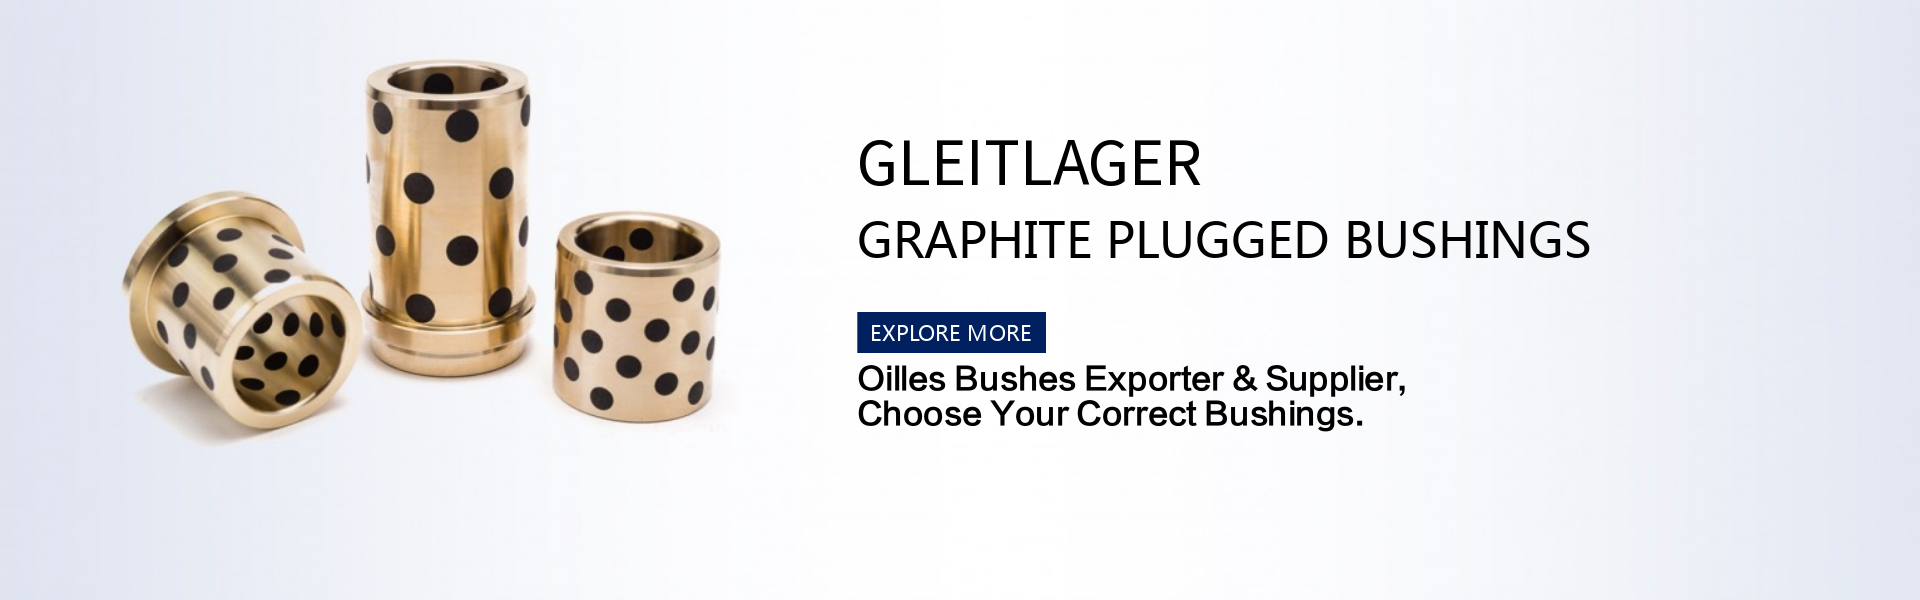 Bronze gleitlager graphite plugged bushings